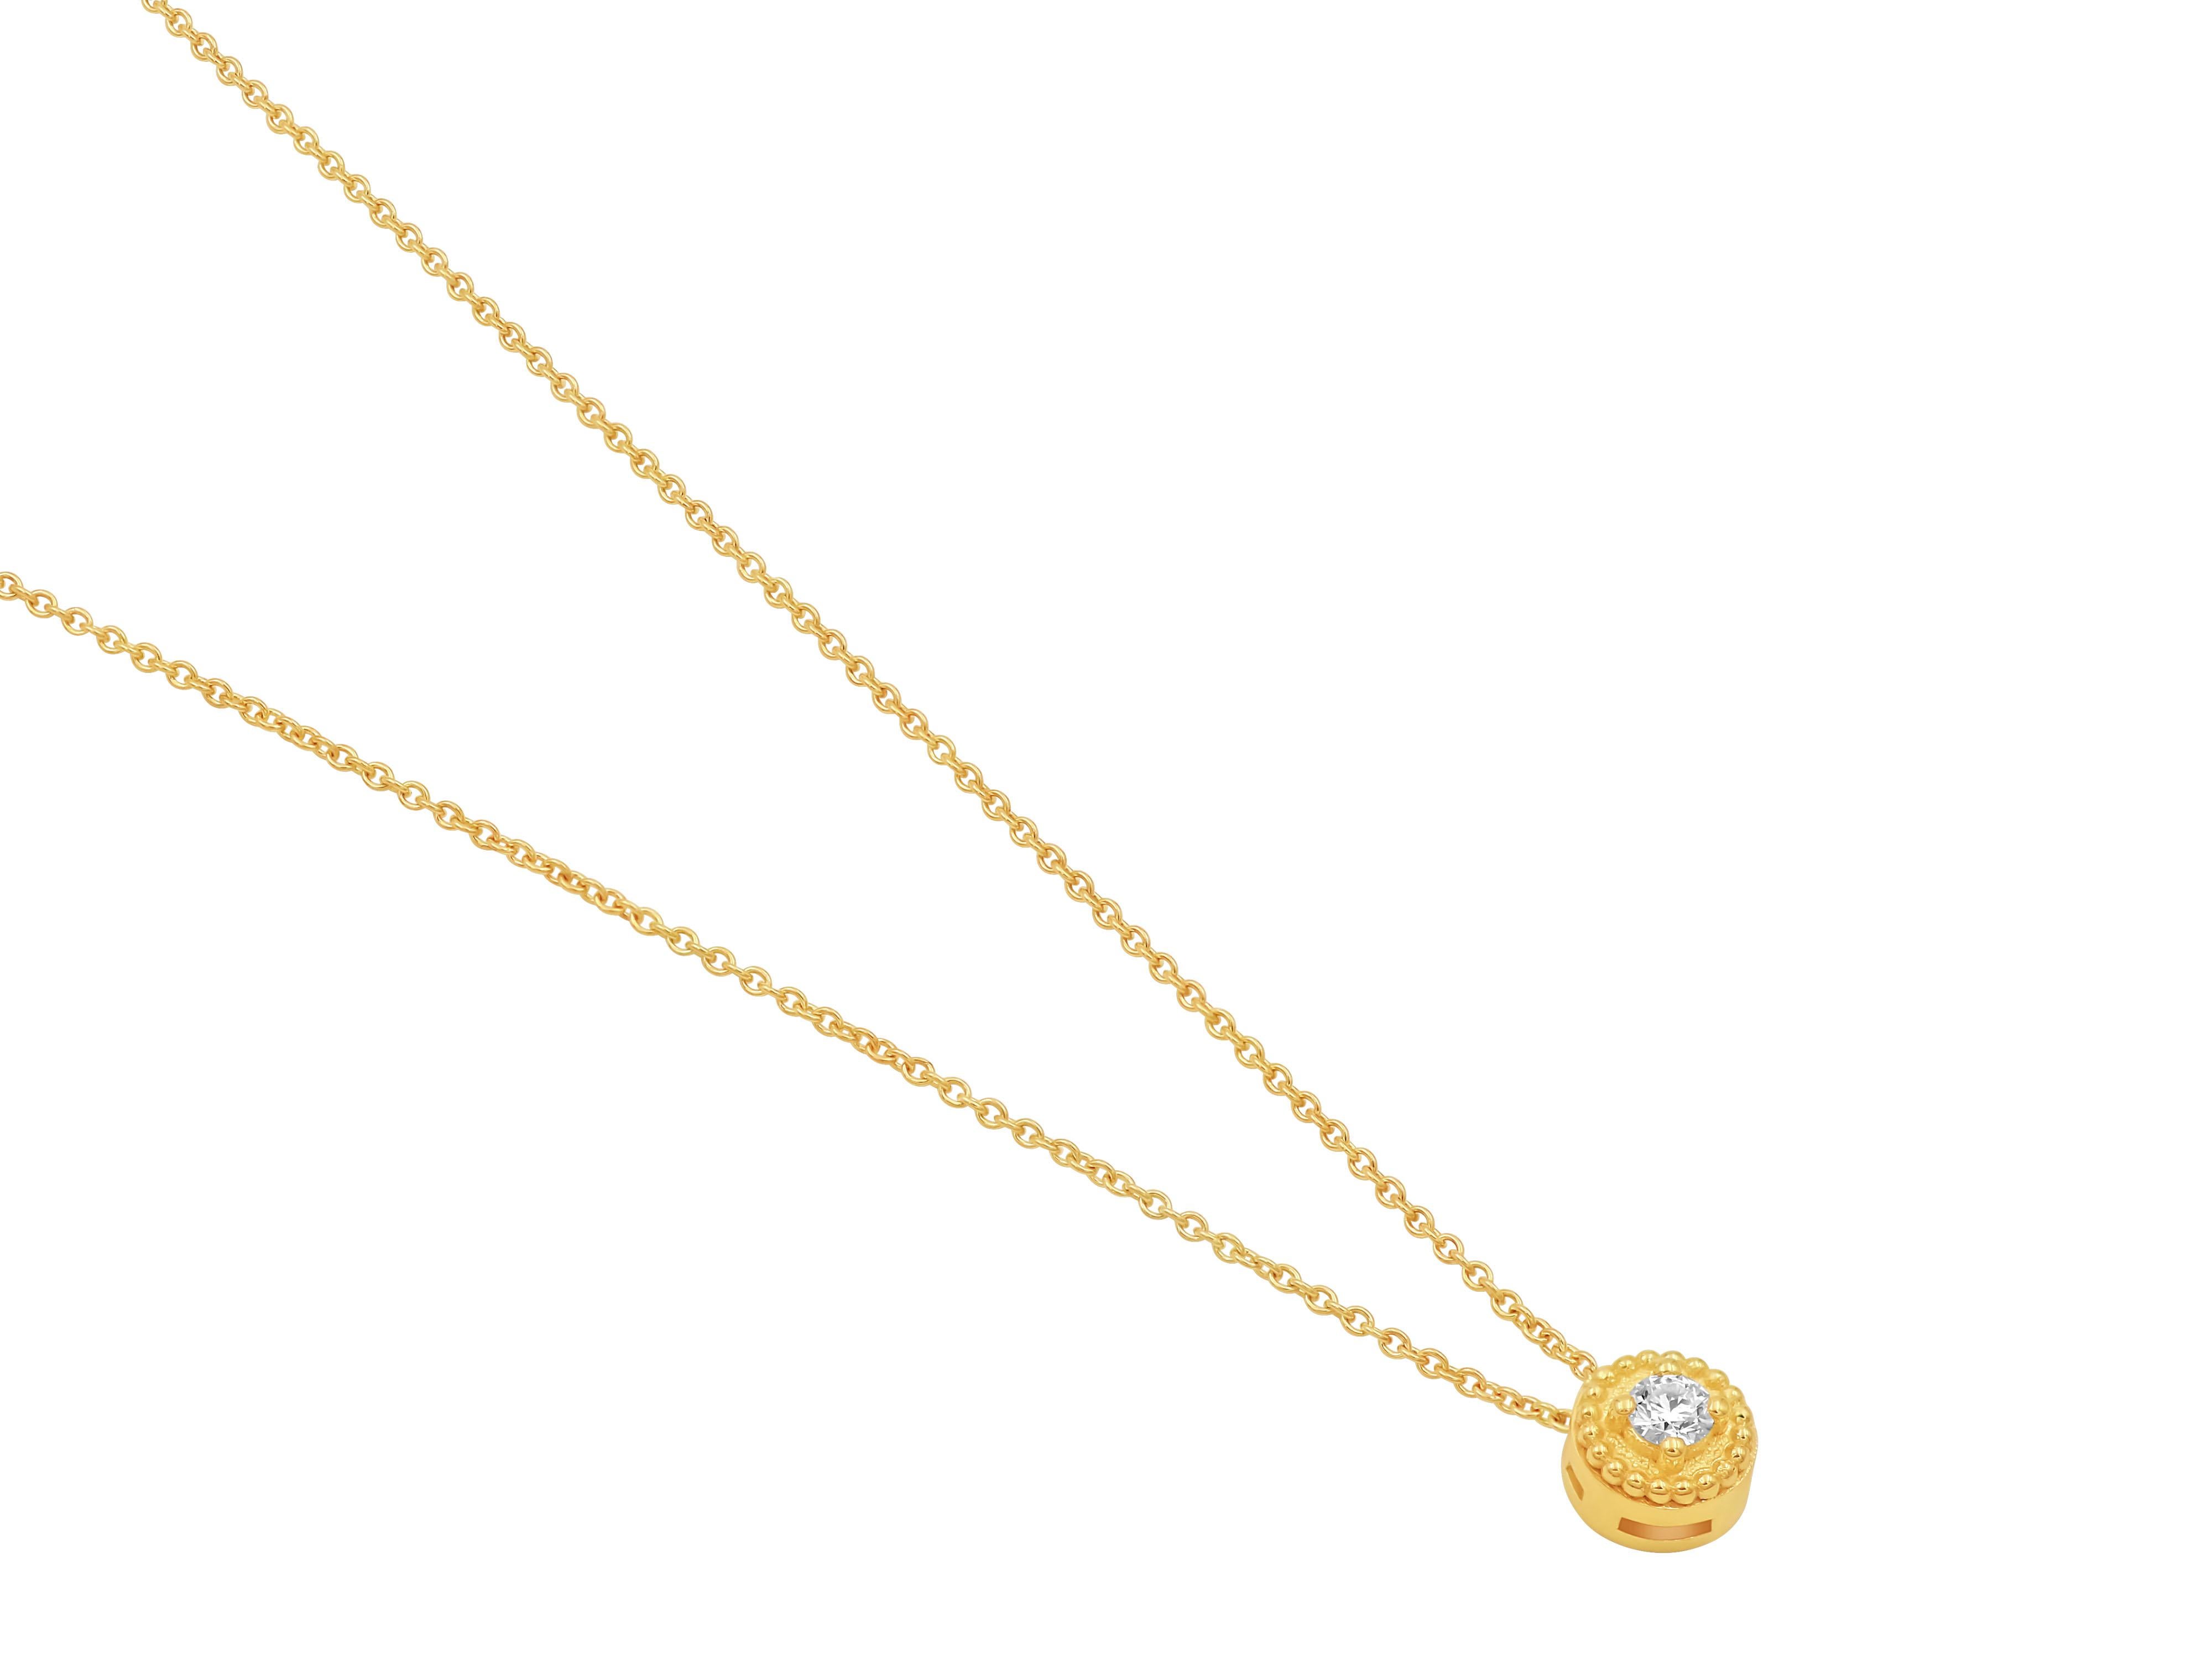 Solid 18k gold Balance necklace set with white brilliant cut natural diamond chosen very carefully for its excellent cut. Elegant piece intricately detailed with granulation, perfect for special occasions or for for everyday wear.